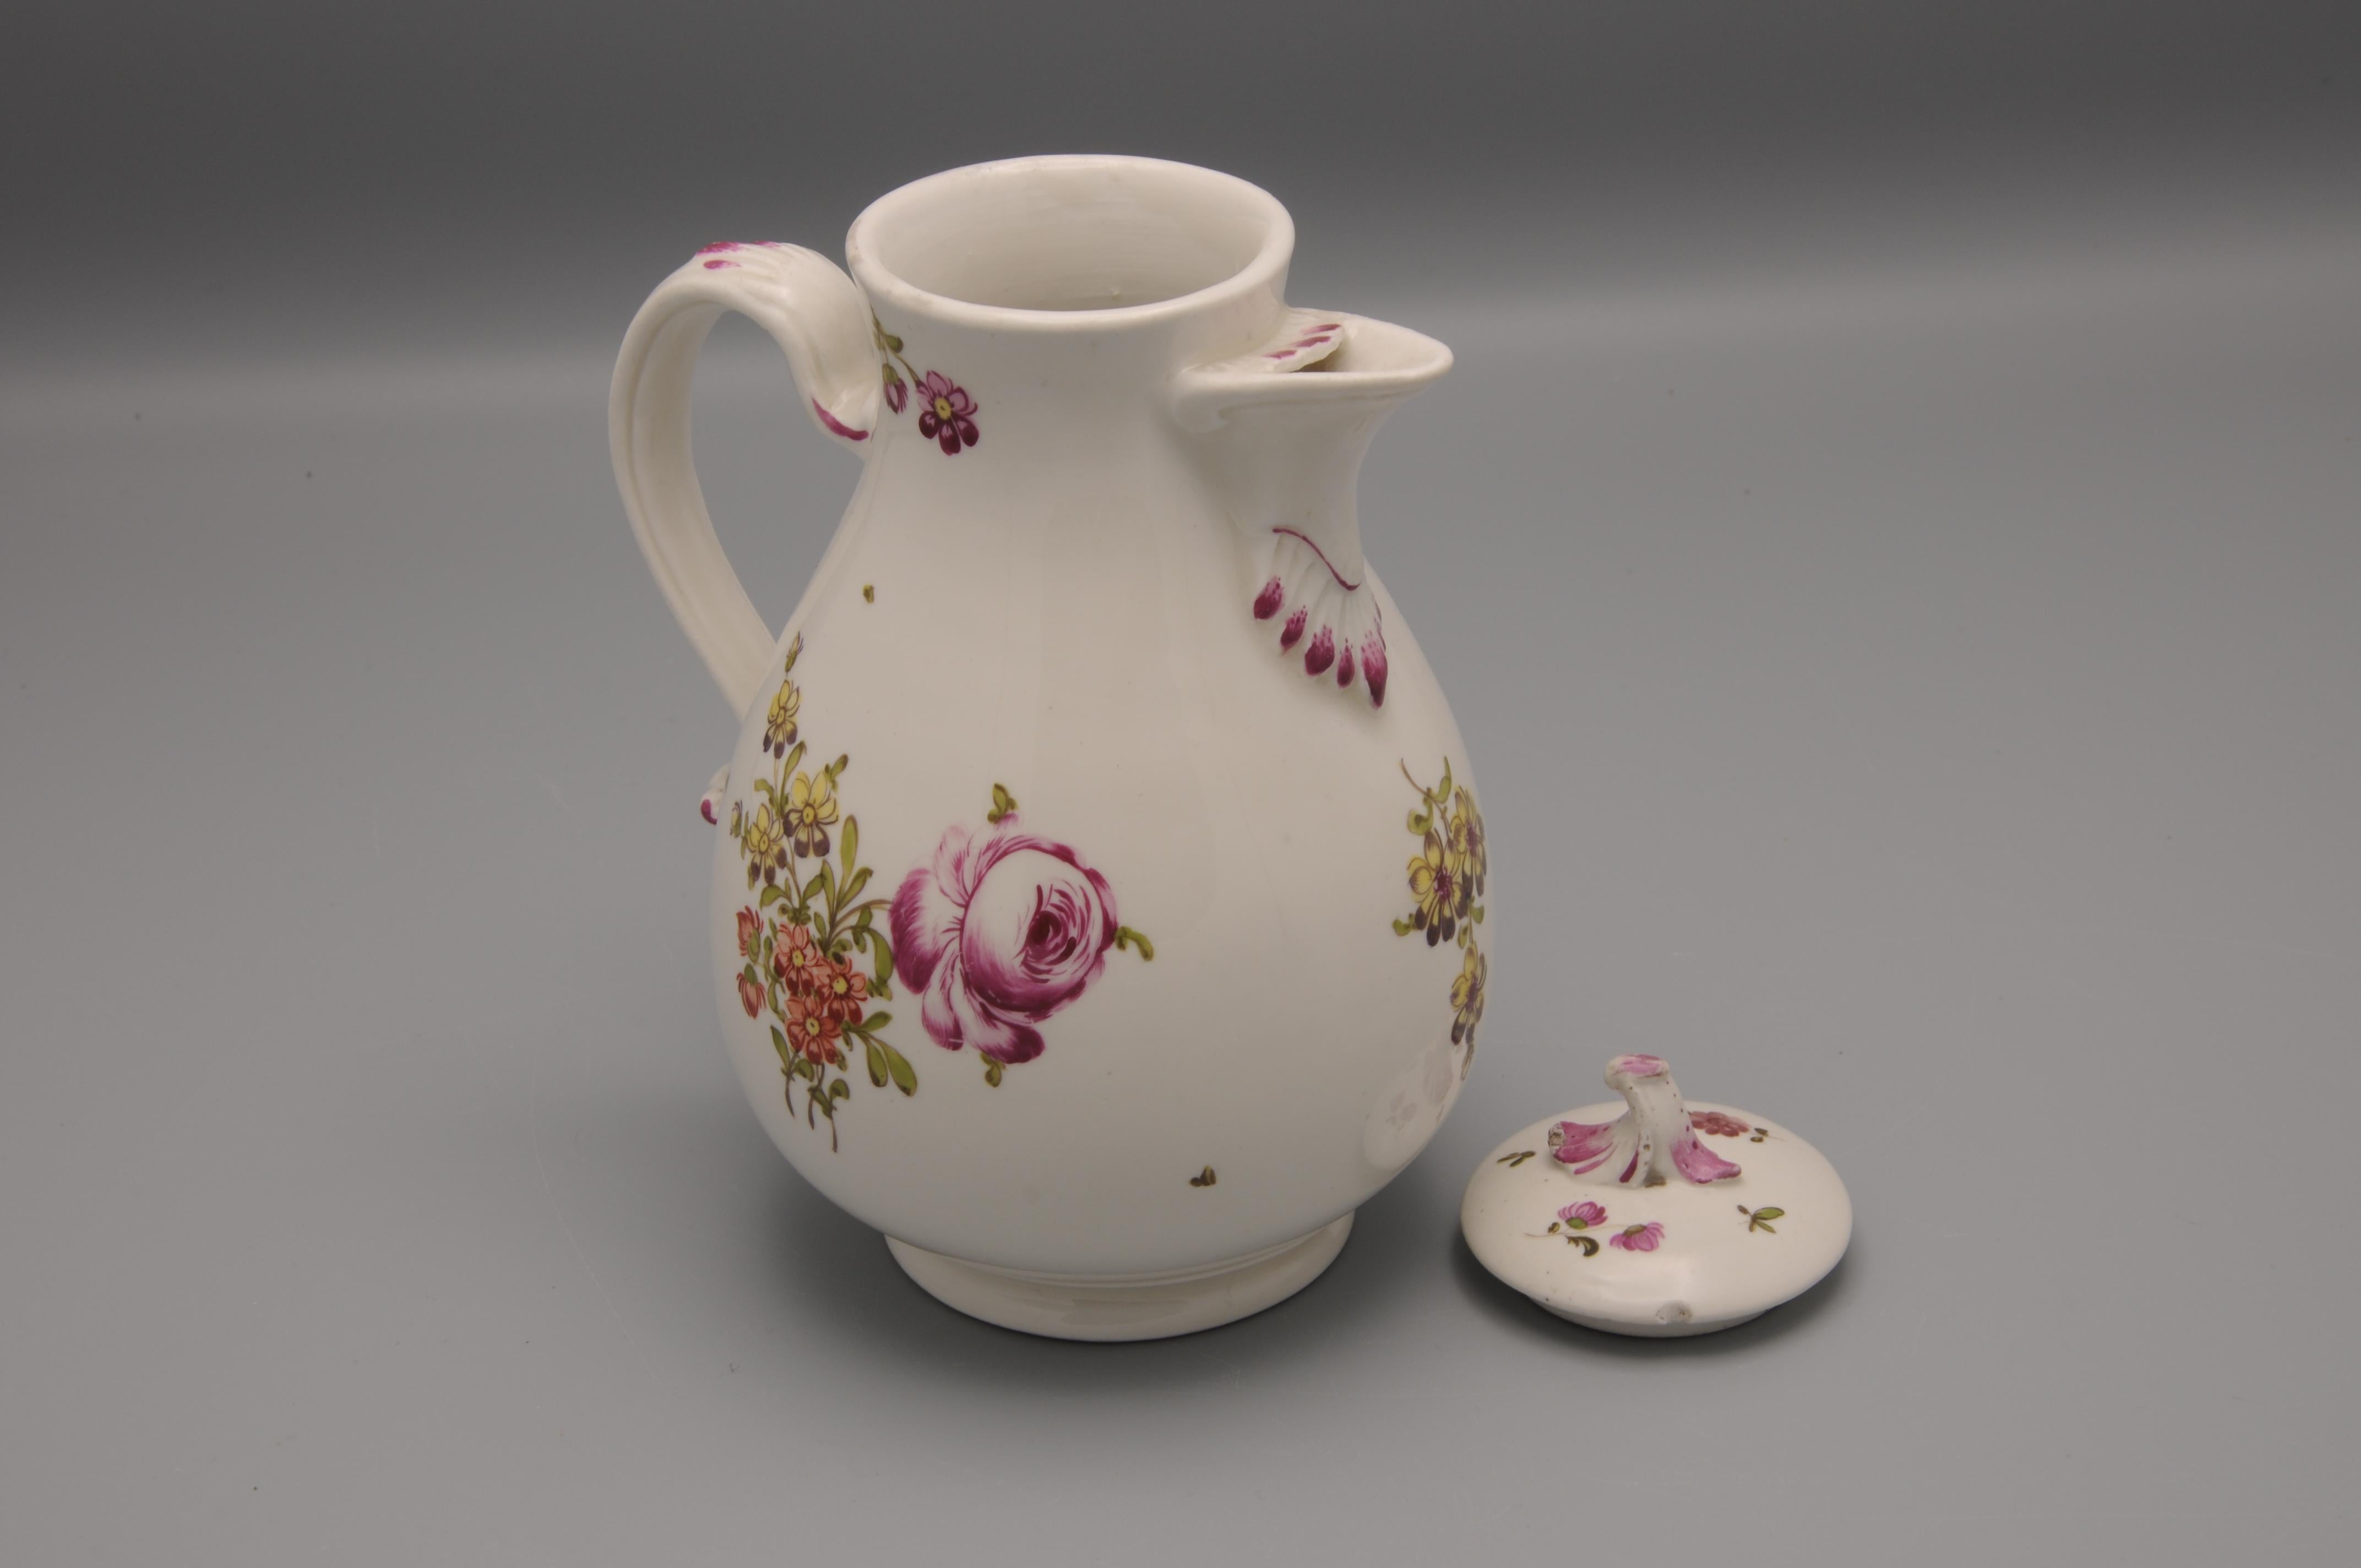 Vienna Porcelain - Rococo Coffeepot, late 18th century For Sale 3